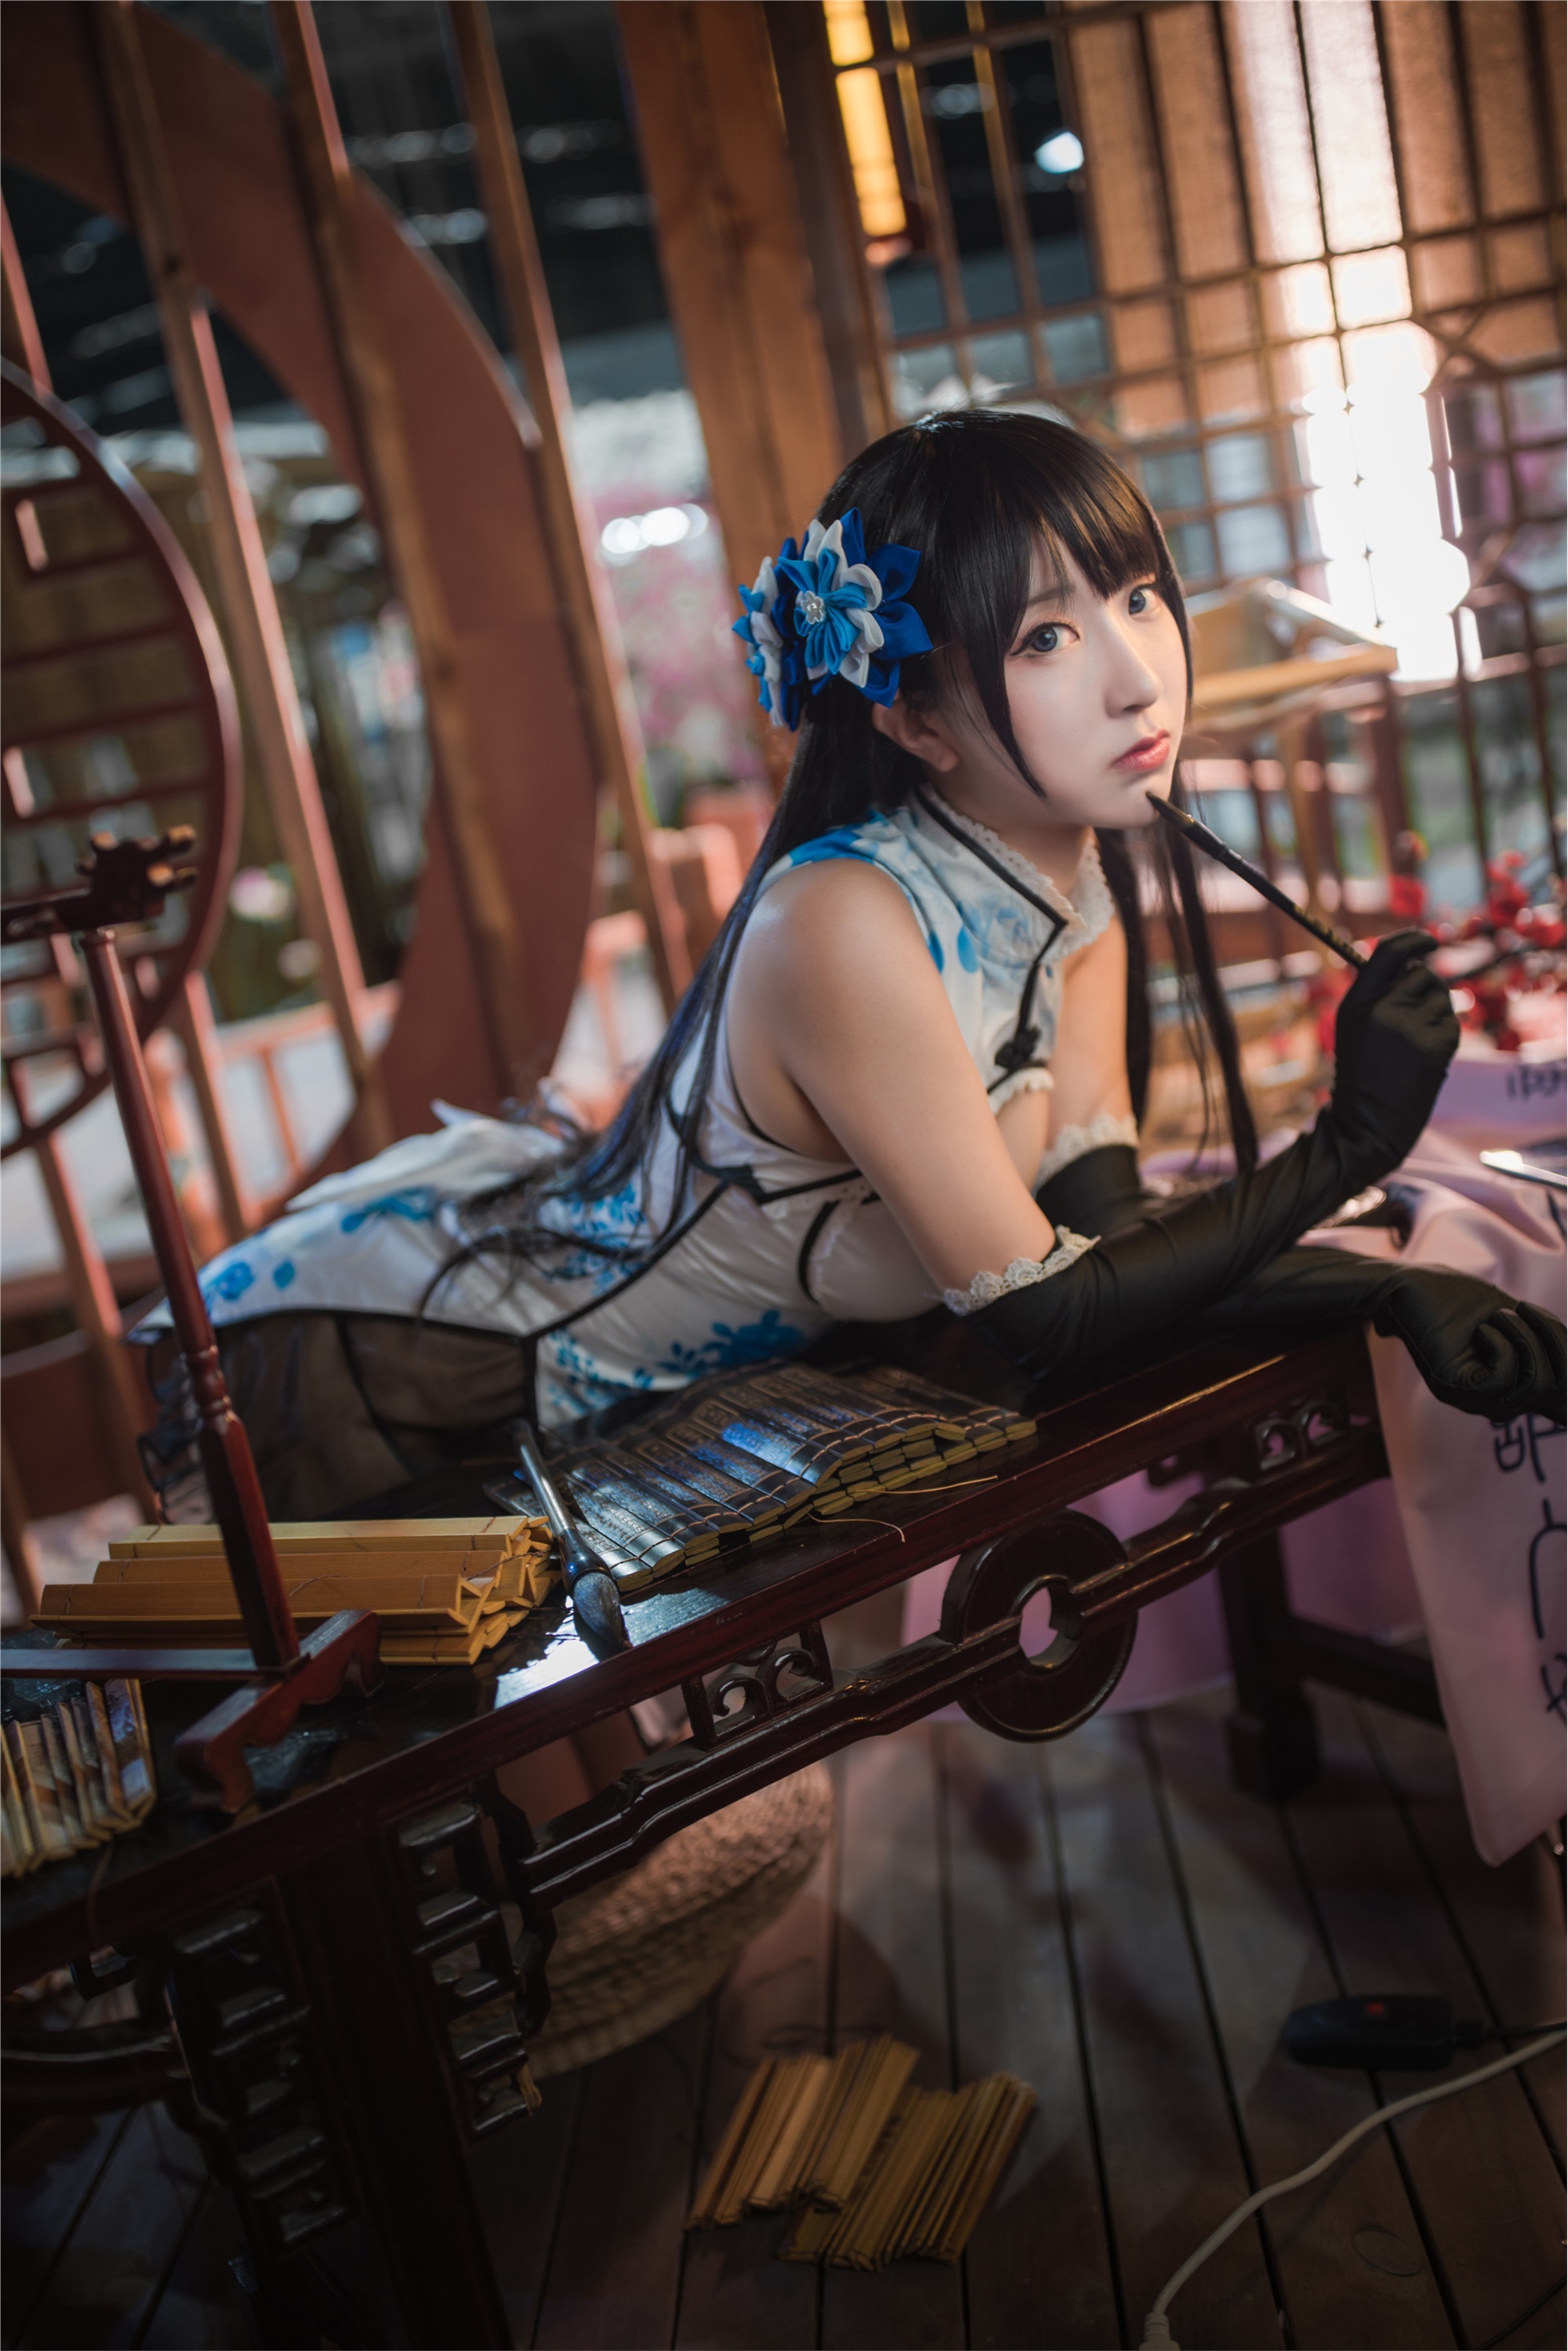 Younger sister of Coser Heichuan